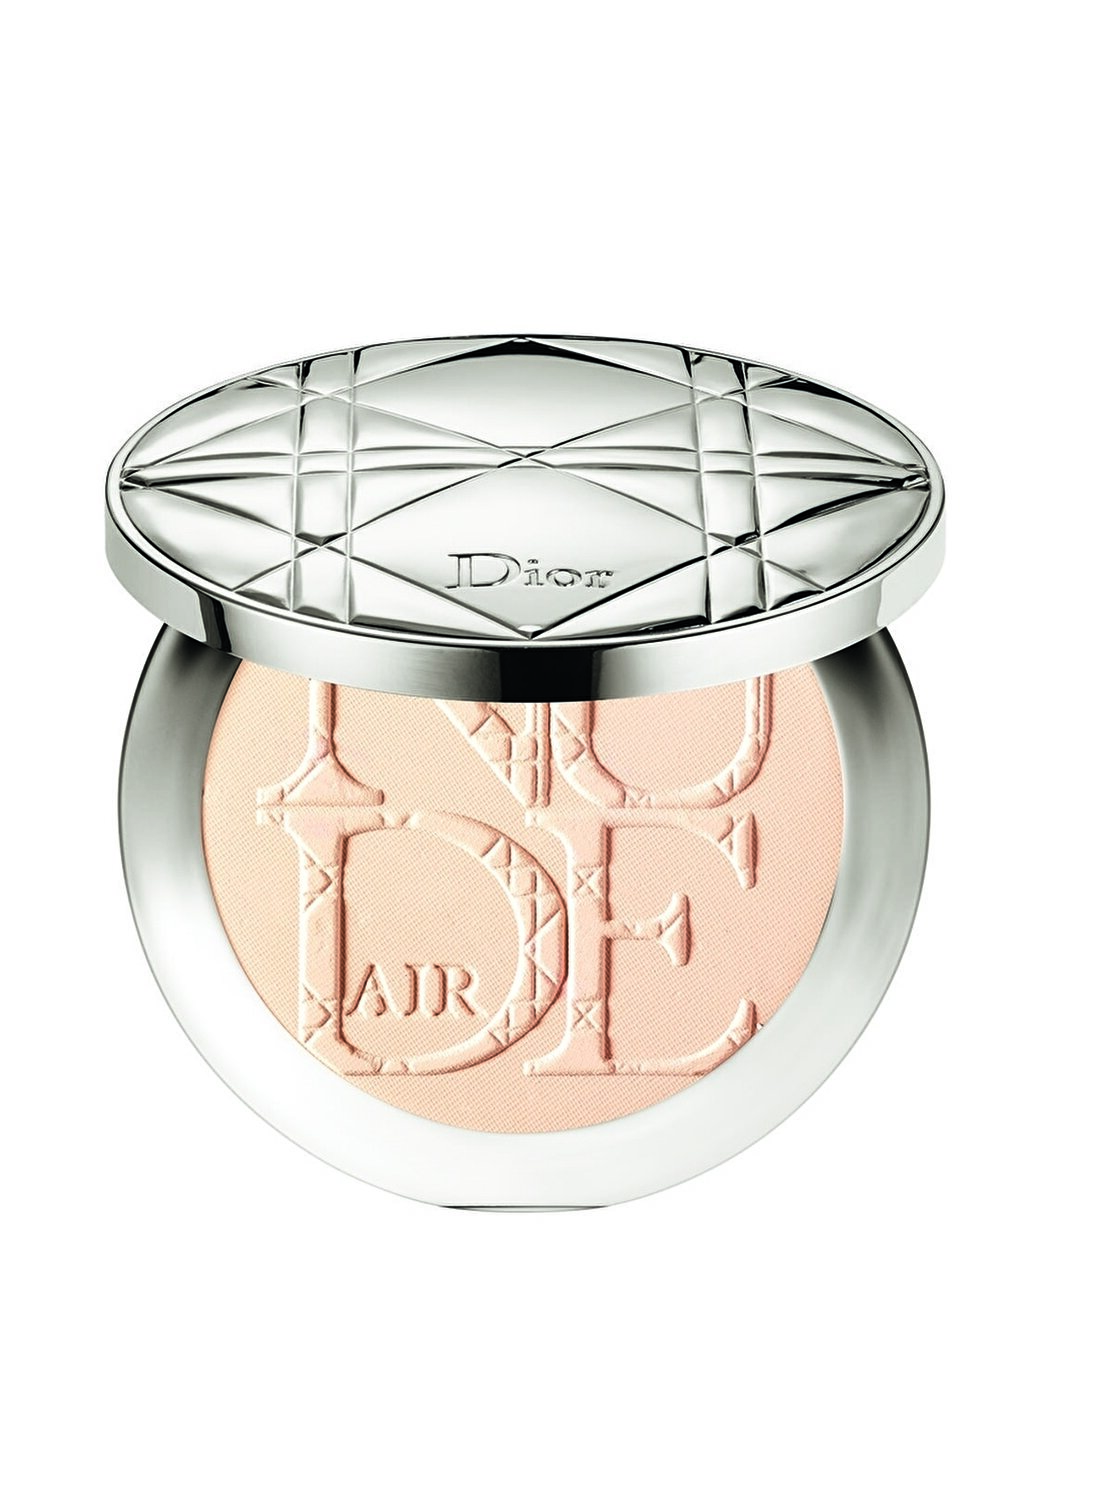 Dior Dreamskin Nude Air Pdr Cpt 010 Pudra